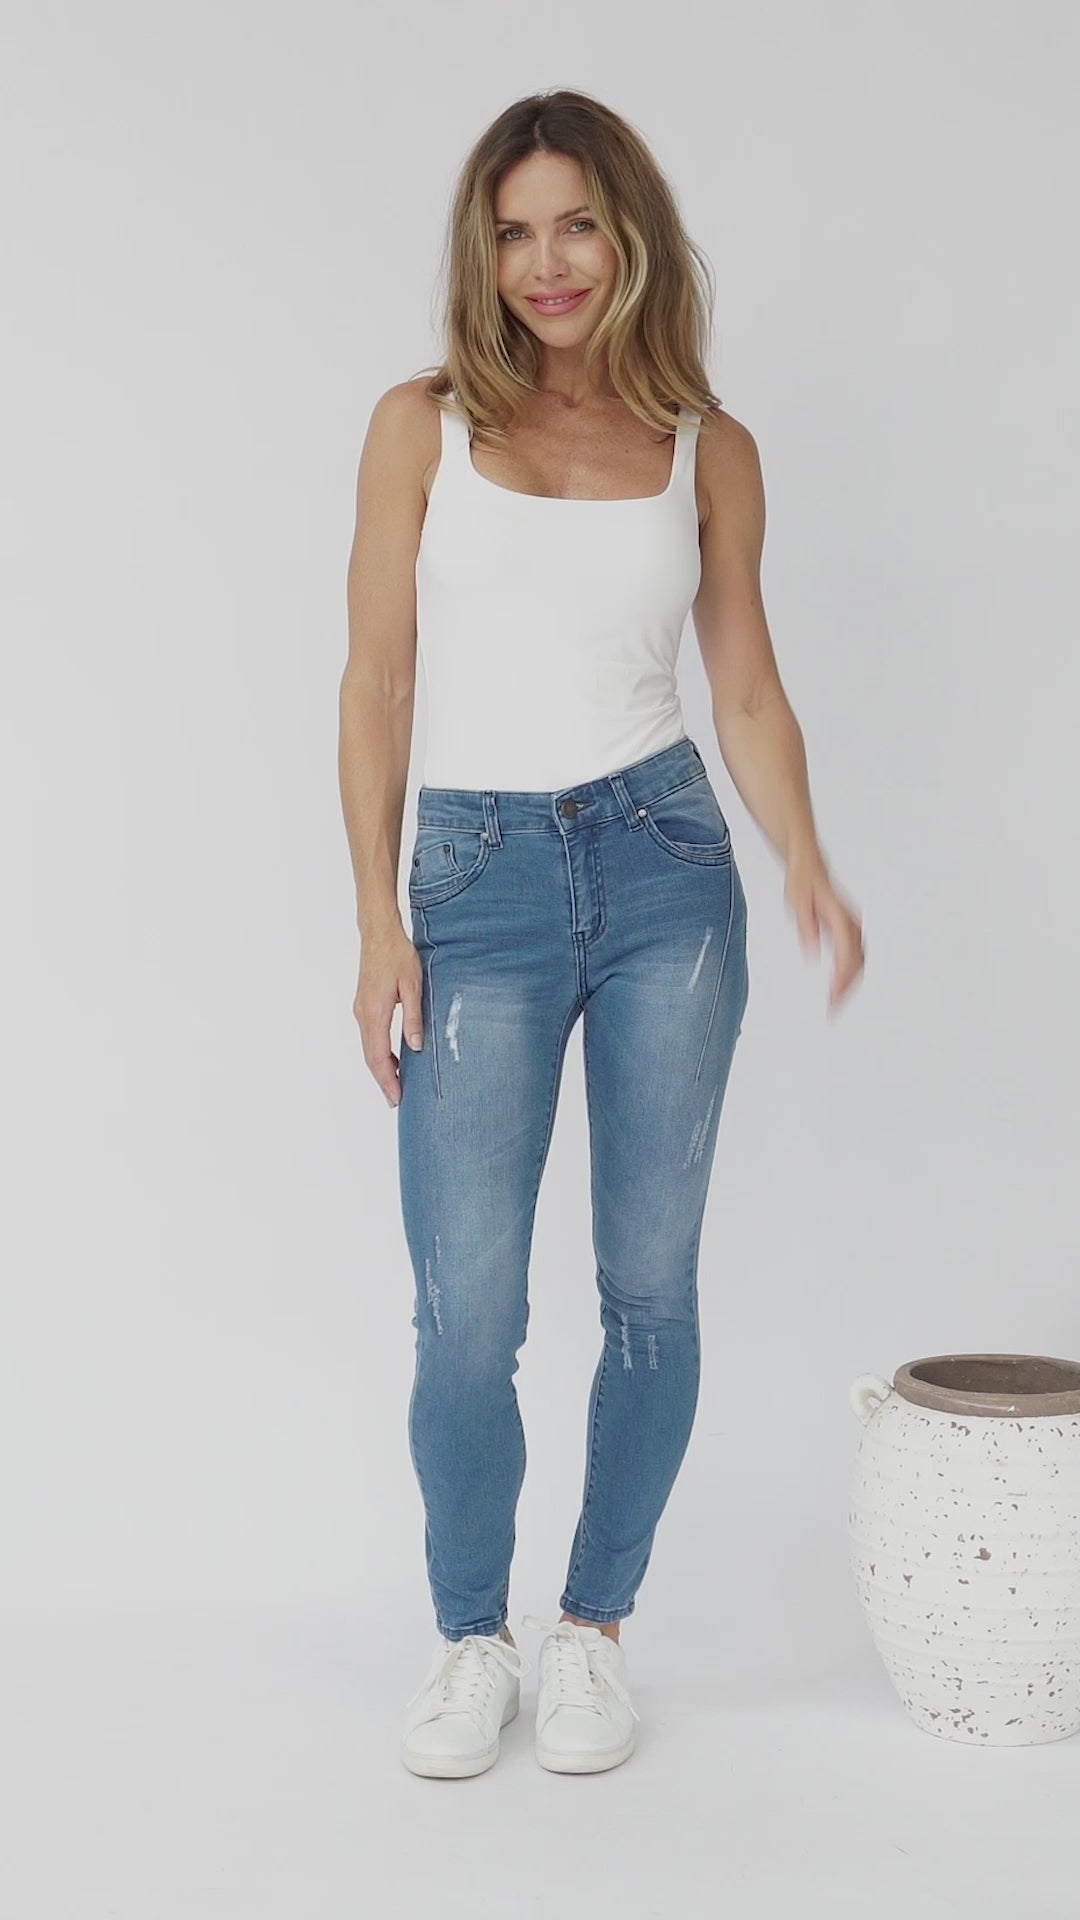 Laurel Jeans - Mid Rise Skinny Leg Distressed Jeans in Blue